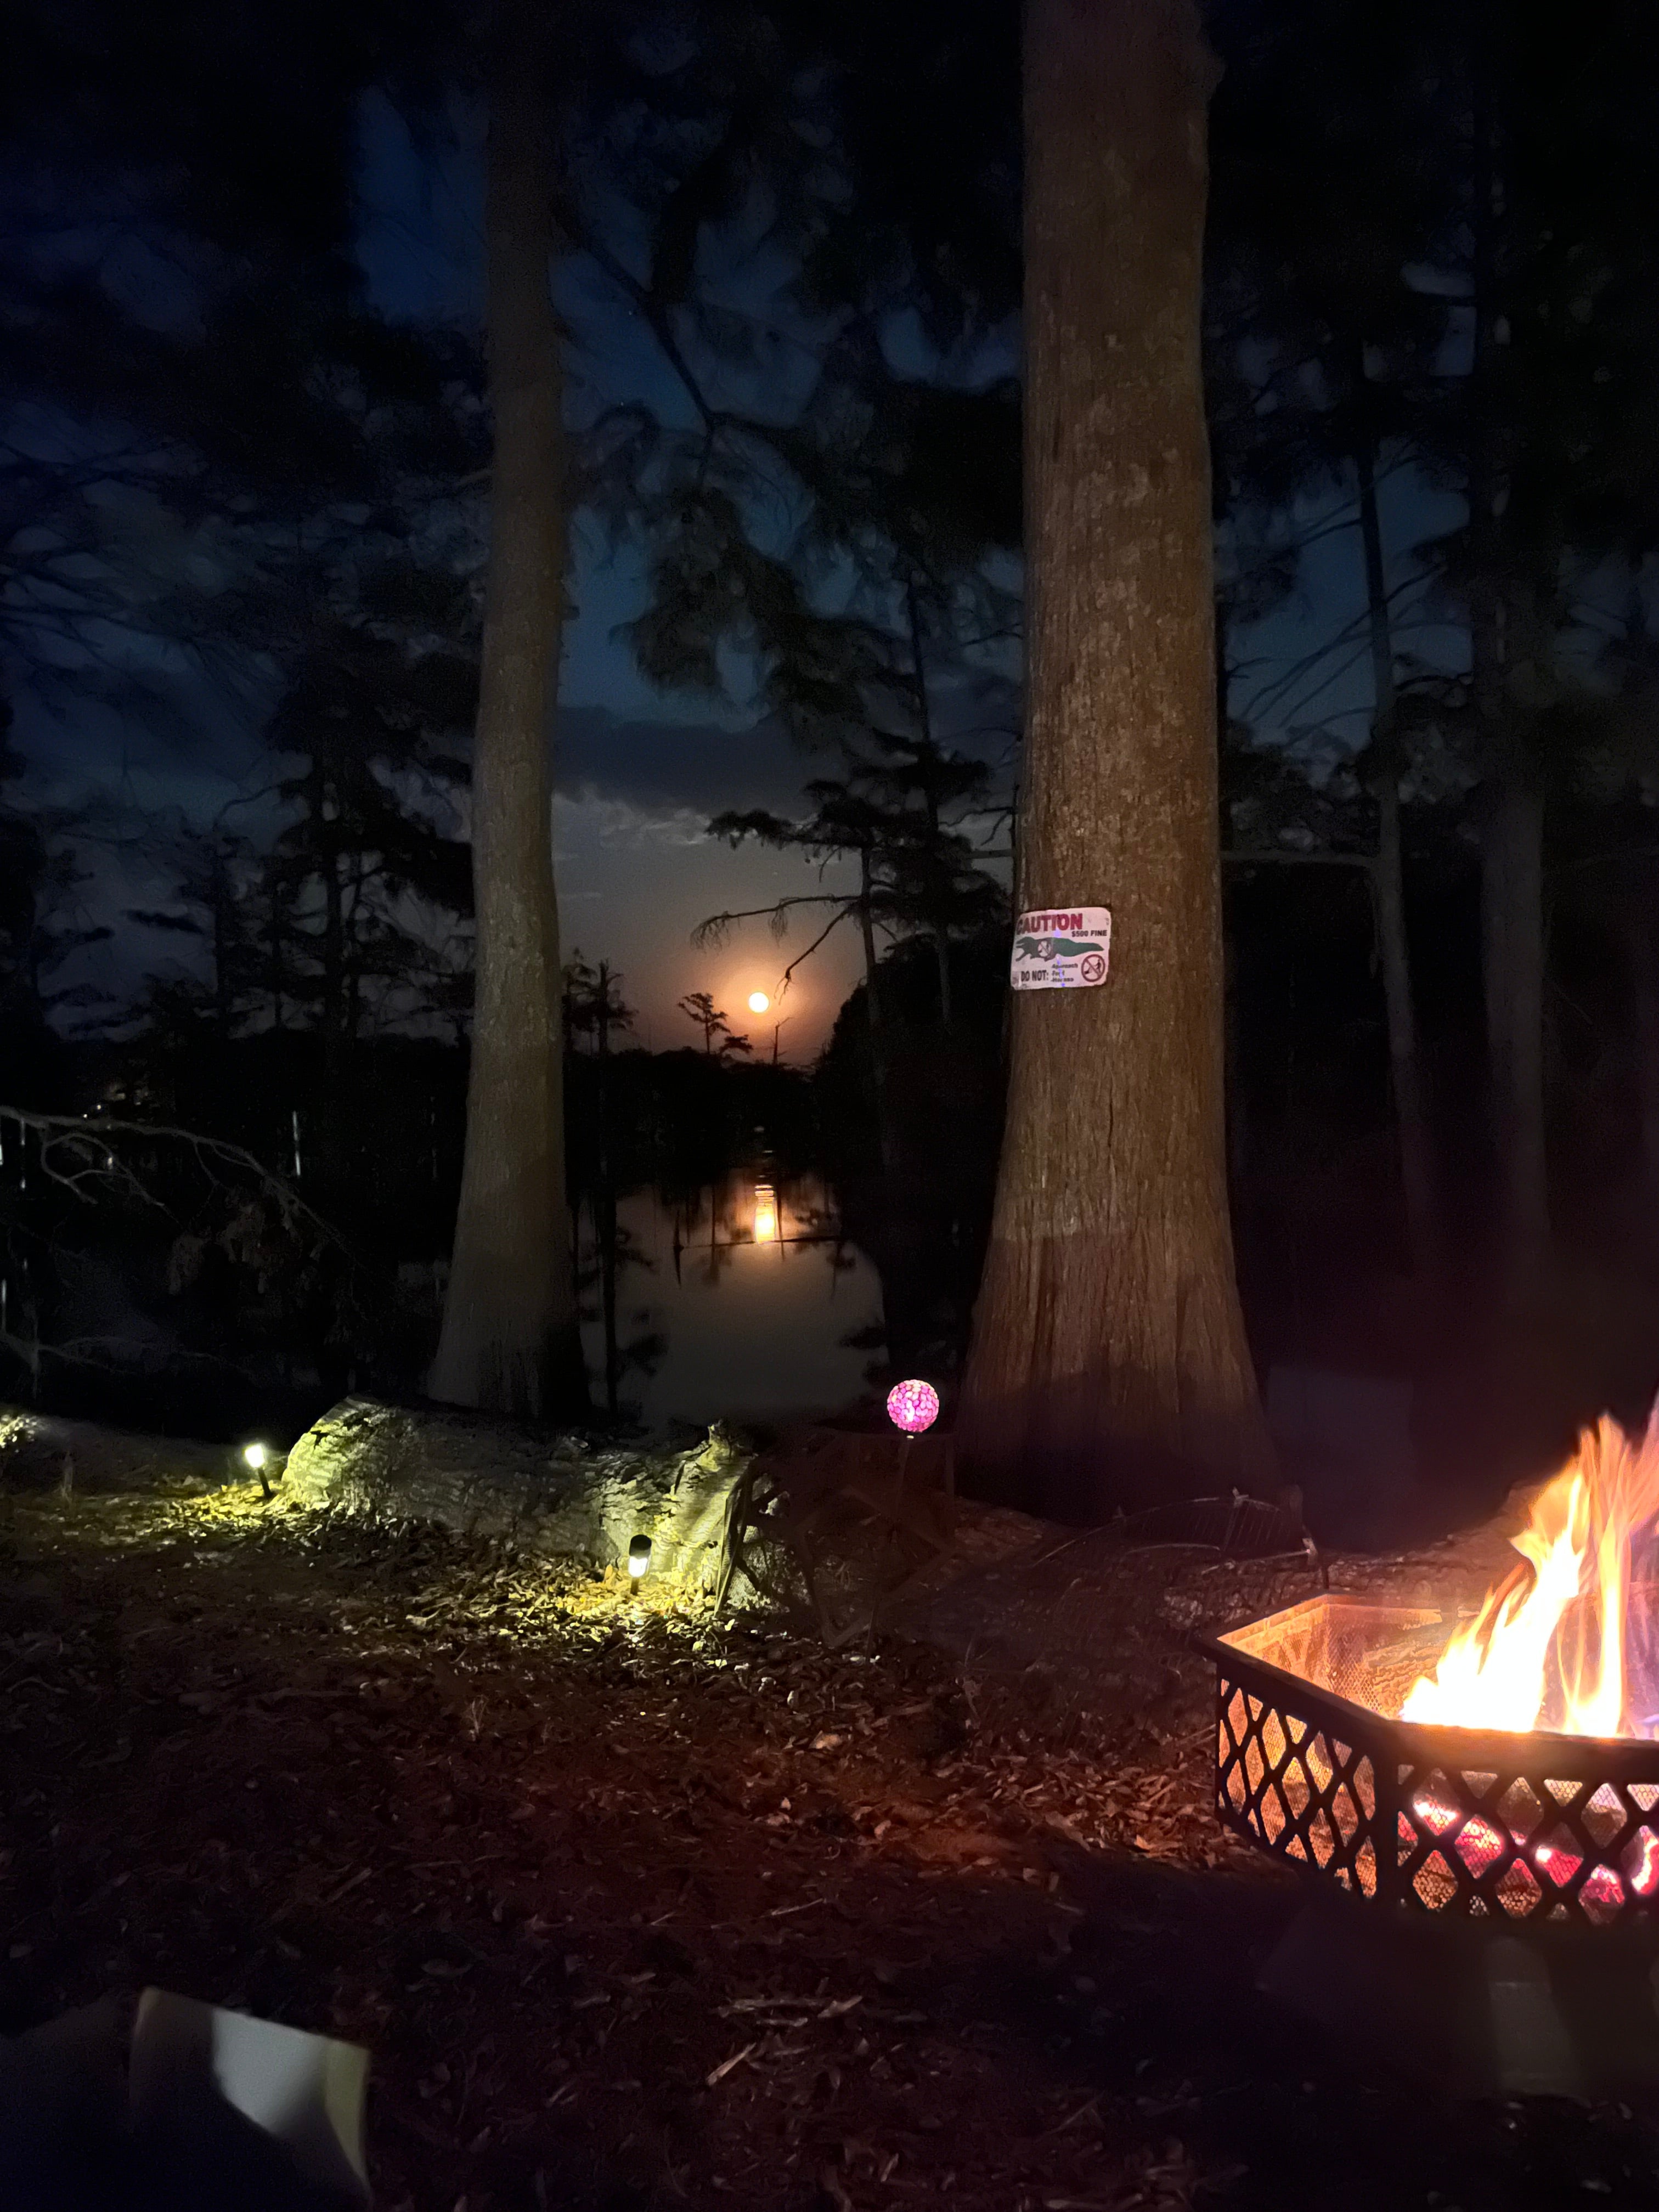 Camper submitted image from Flamingo Pointe RV Park at Lake Wallace, 2 miles off US HYW 165 - 4